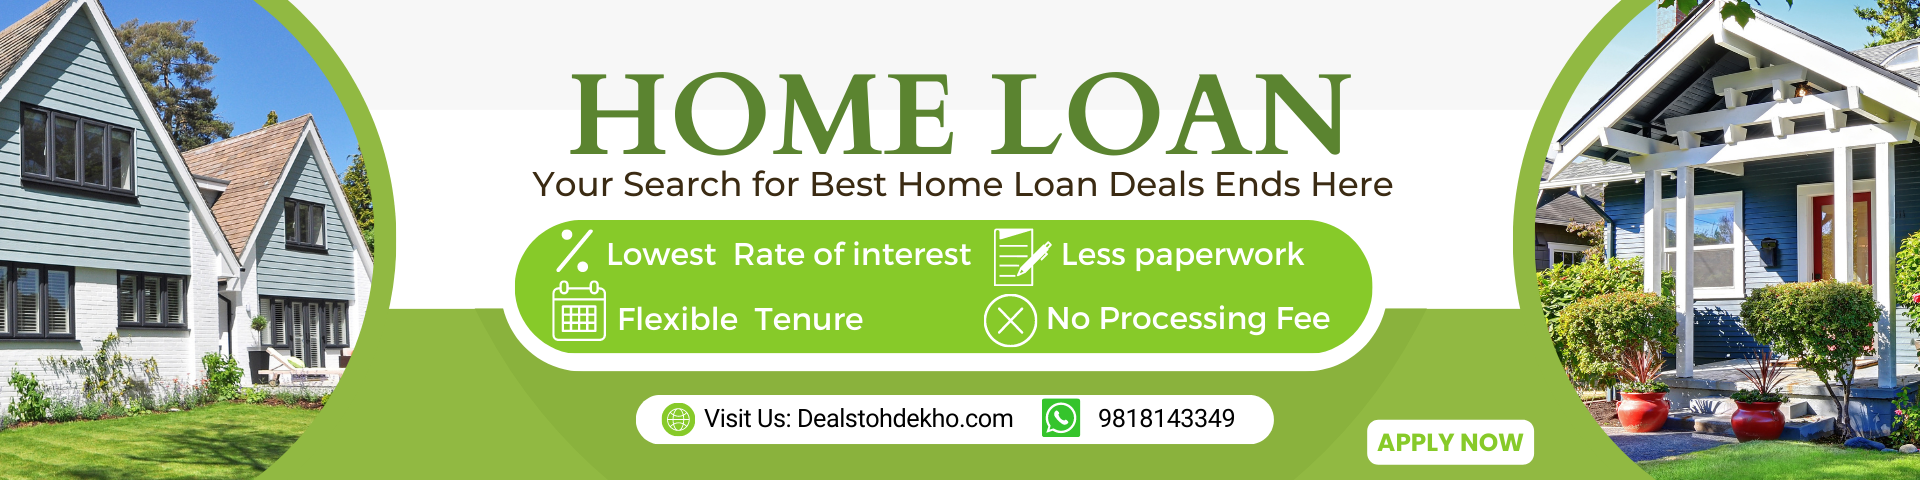 apply home loan at lowest rate of interest